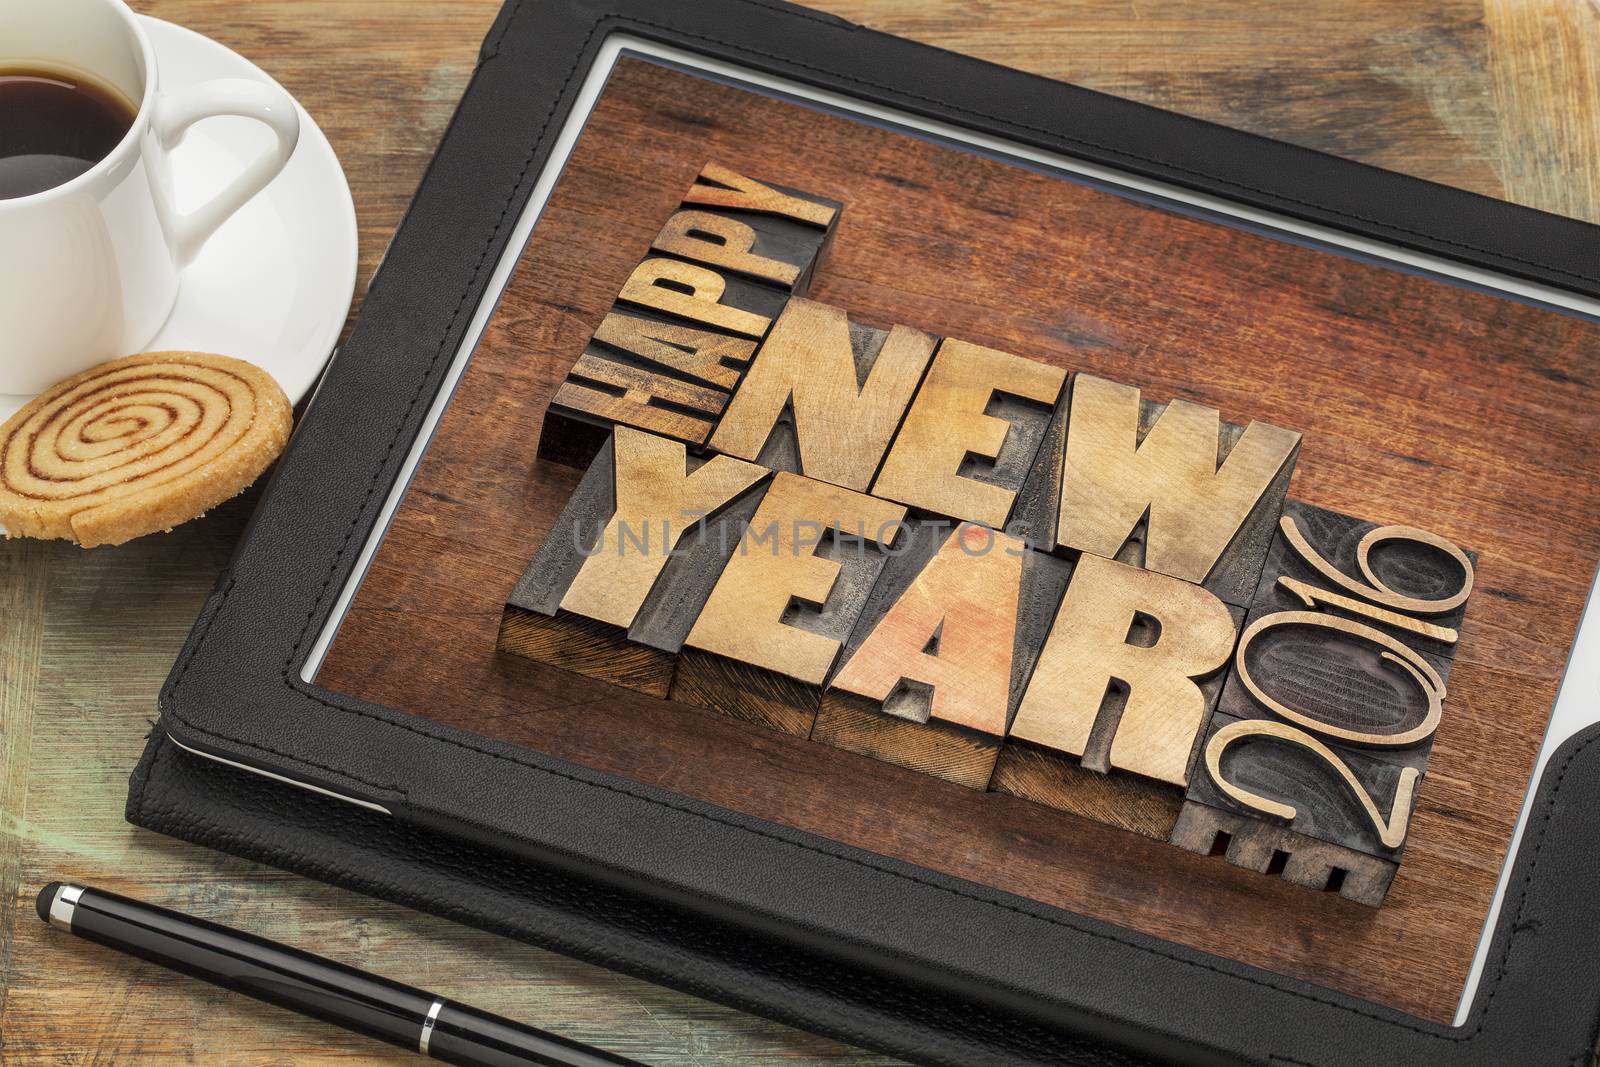 Happy New Year 2016 greetings  - text in vintage letterpress wood type blocks on a digital tablet with a cup of coffee